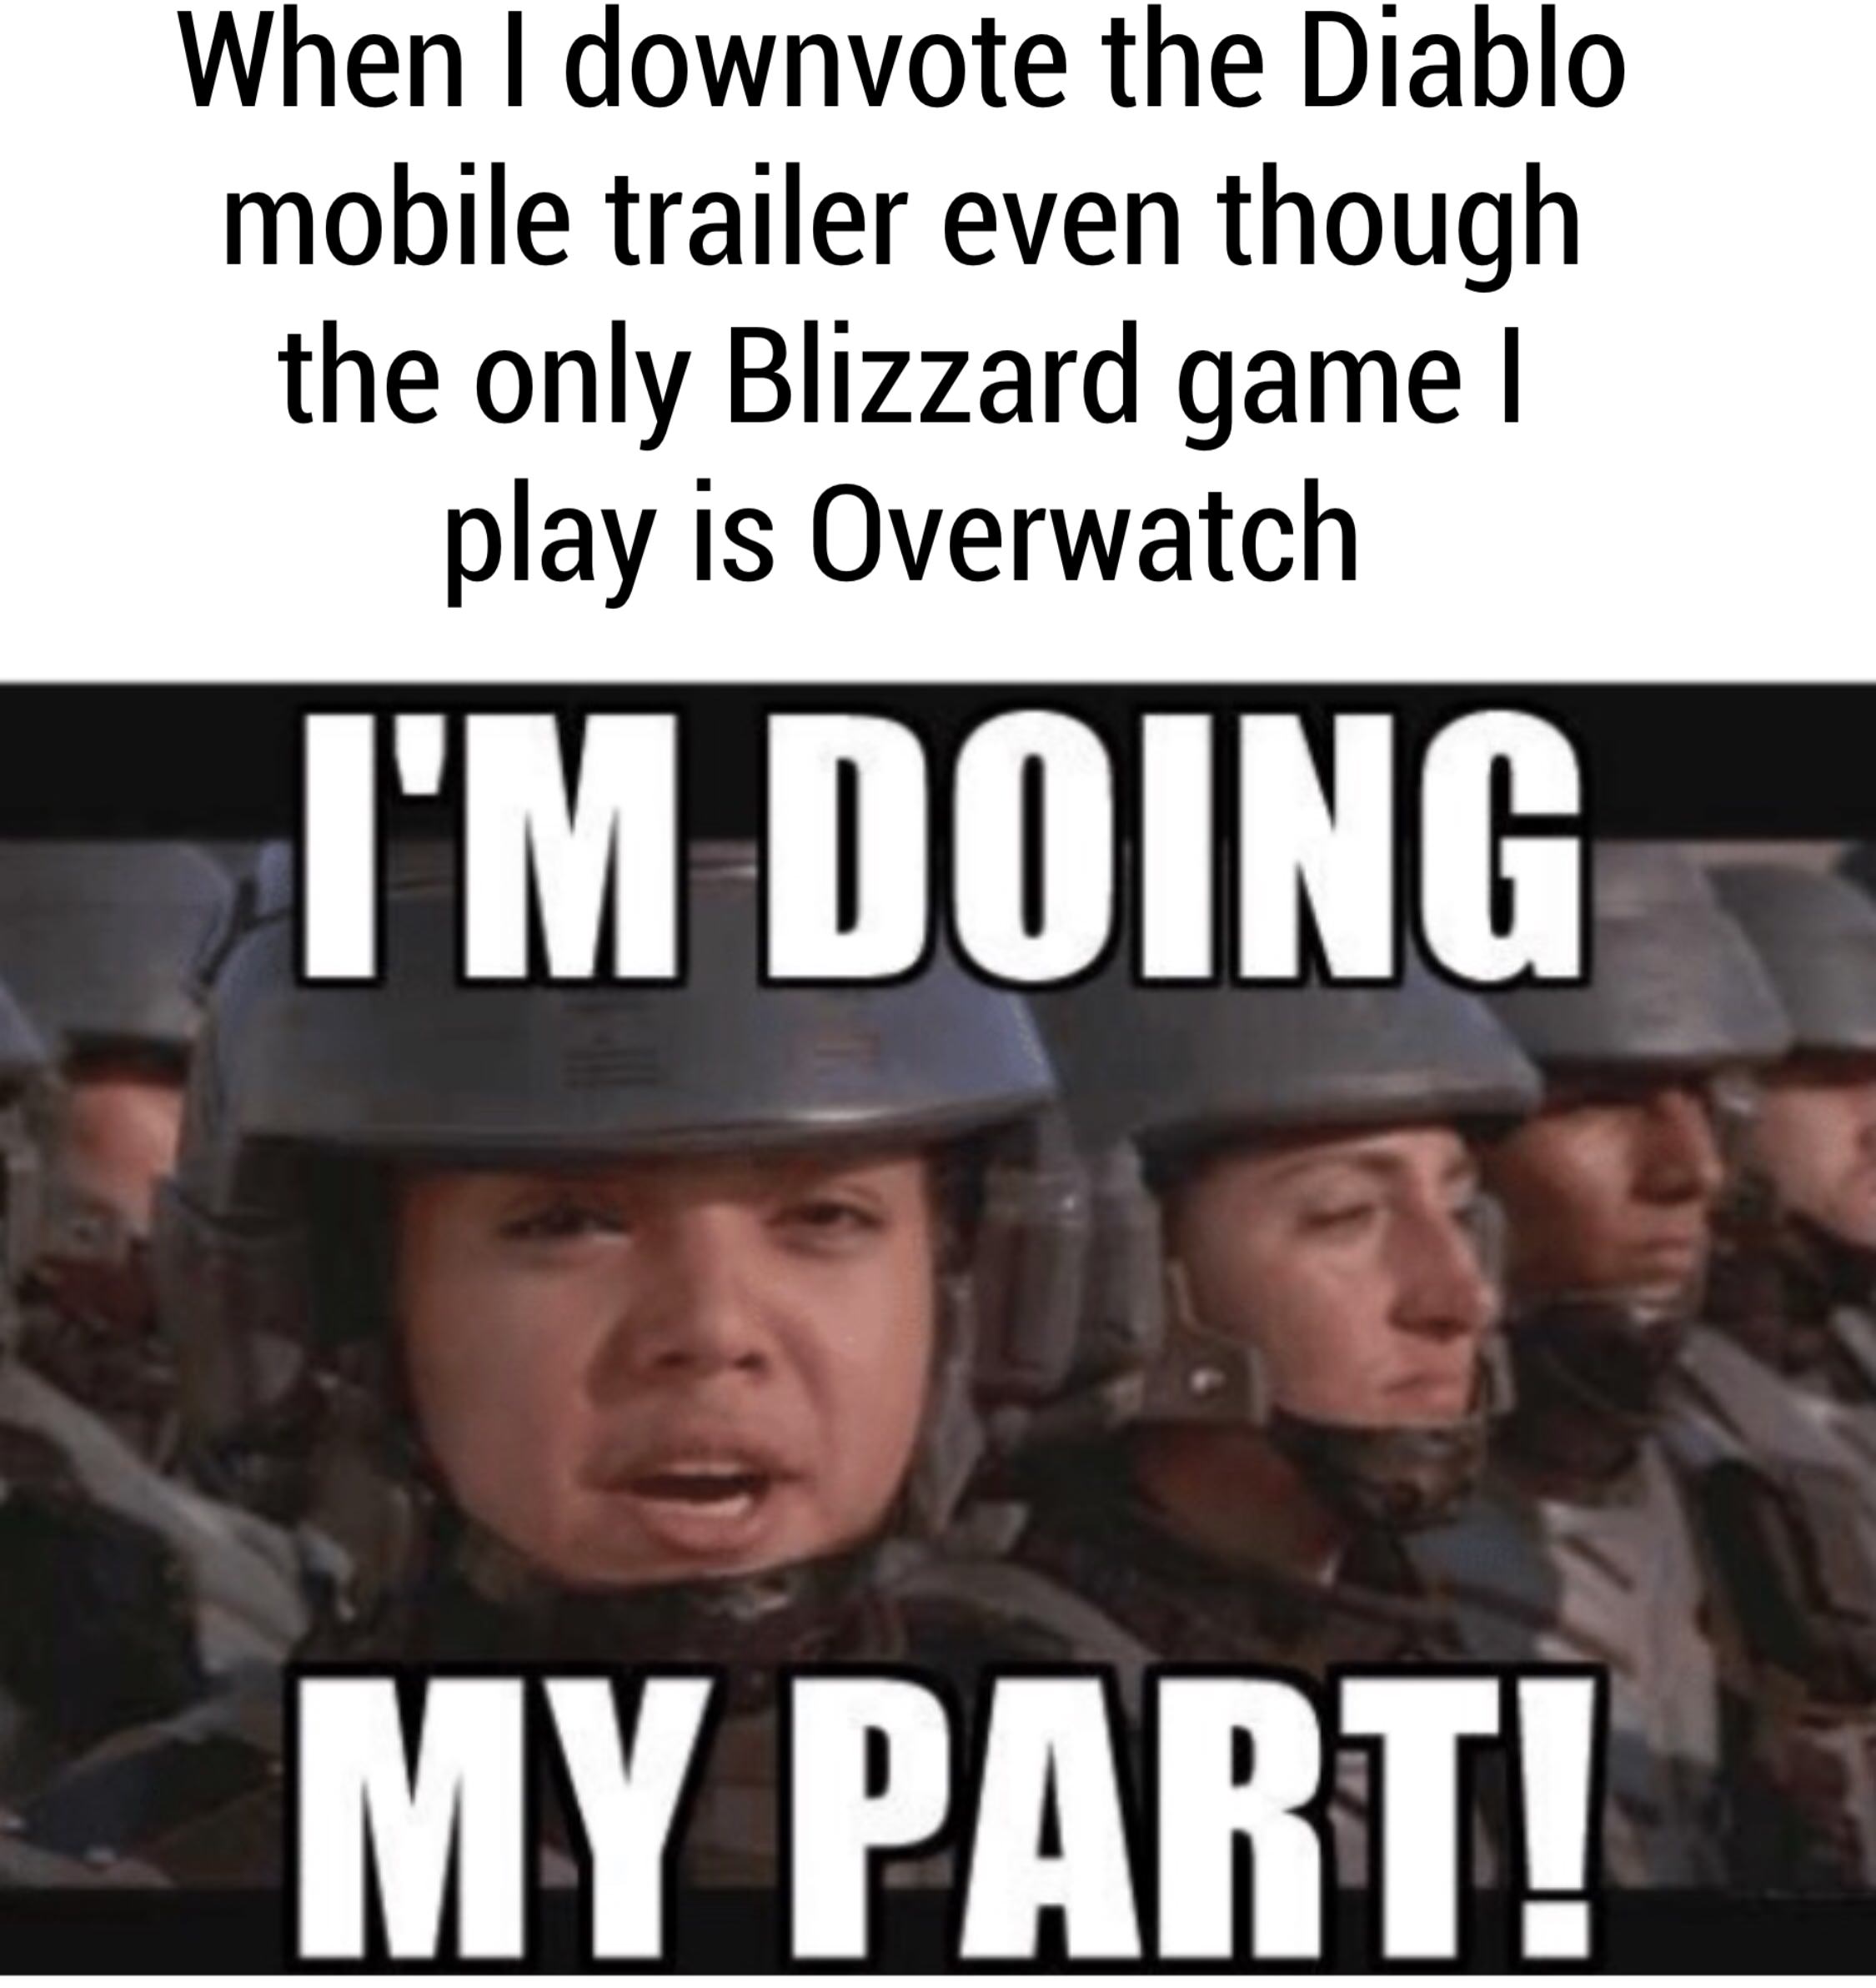 diablo mobile meme - When I downvote the Diablo mobile trailer even though the only Blizzard game! play is Overwatch I'M Doing My Part!